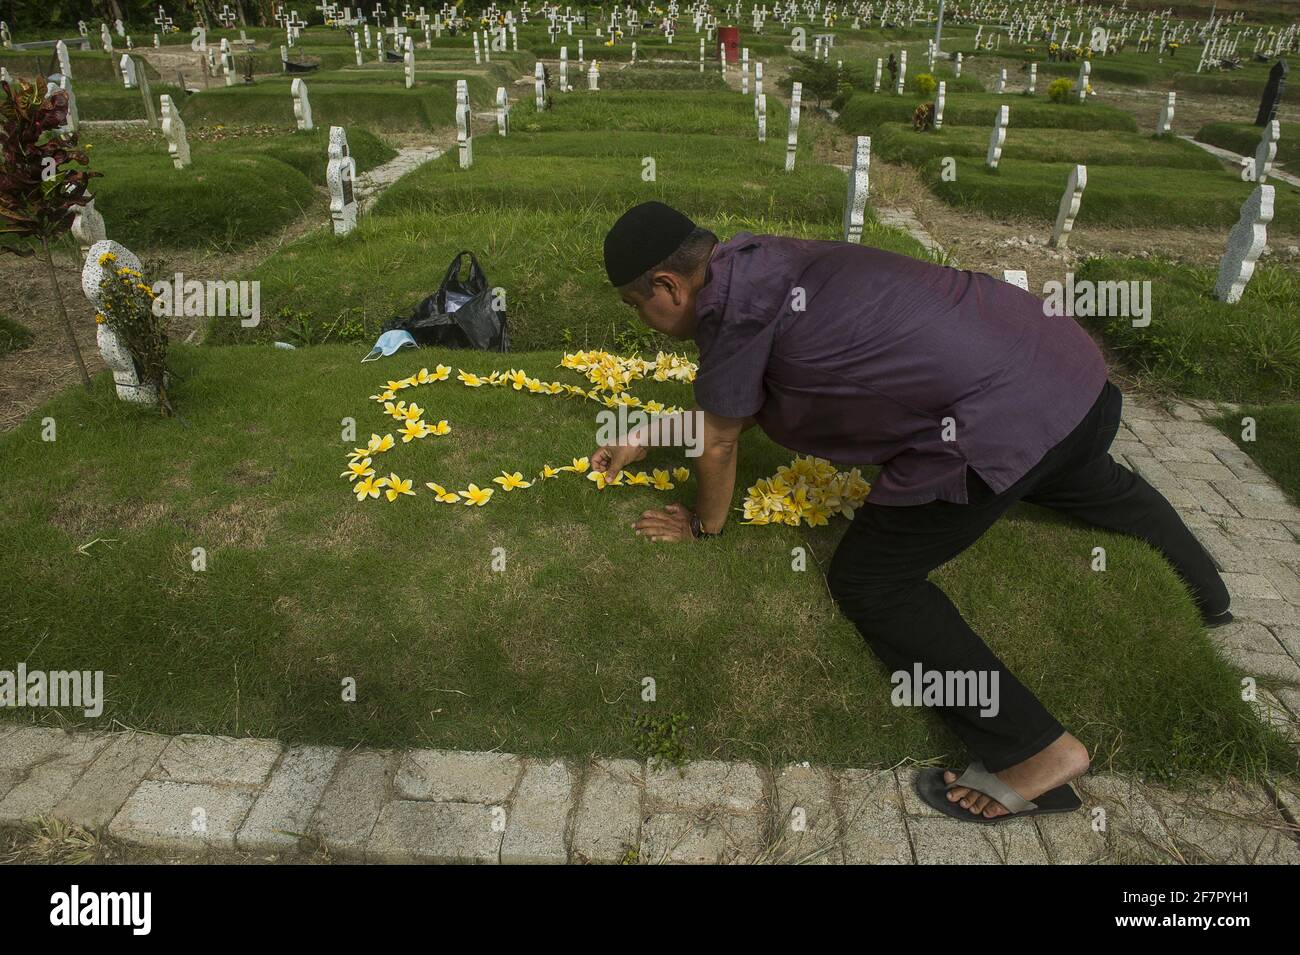 Medan, Indonesia. 09th Apr, 2021. A man, Hanafi, 42, seen make flower as love to carrying out the tradition of a funeral pilgrimage to welcome the holy month of Ramadan 1442H at specific cemetery for coronavirus pandemic victims in Medan, Indonesia on April 9, 2021. Hanafi admitted to being sad and traumatized were remembering 9 months ago moment, when his wife died due coronavirus disease-19 in the same time with Eid Al-Fitr 2020. Photo by Sutanta Aditya/ABACAPRESS.COM Credit: Abaca Press/Alamy Live News Stock Photo